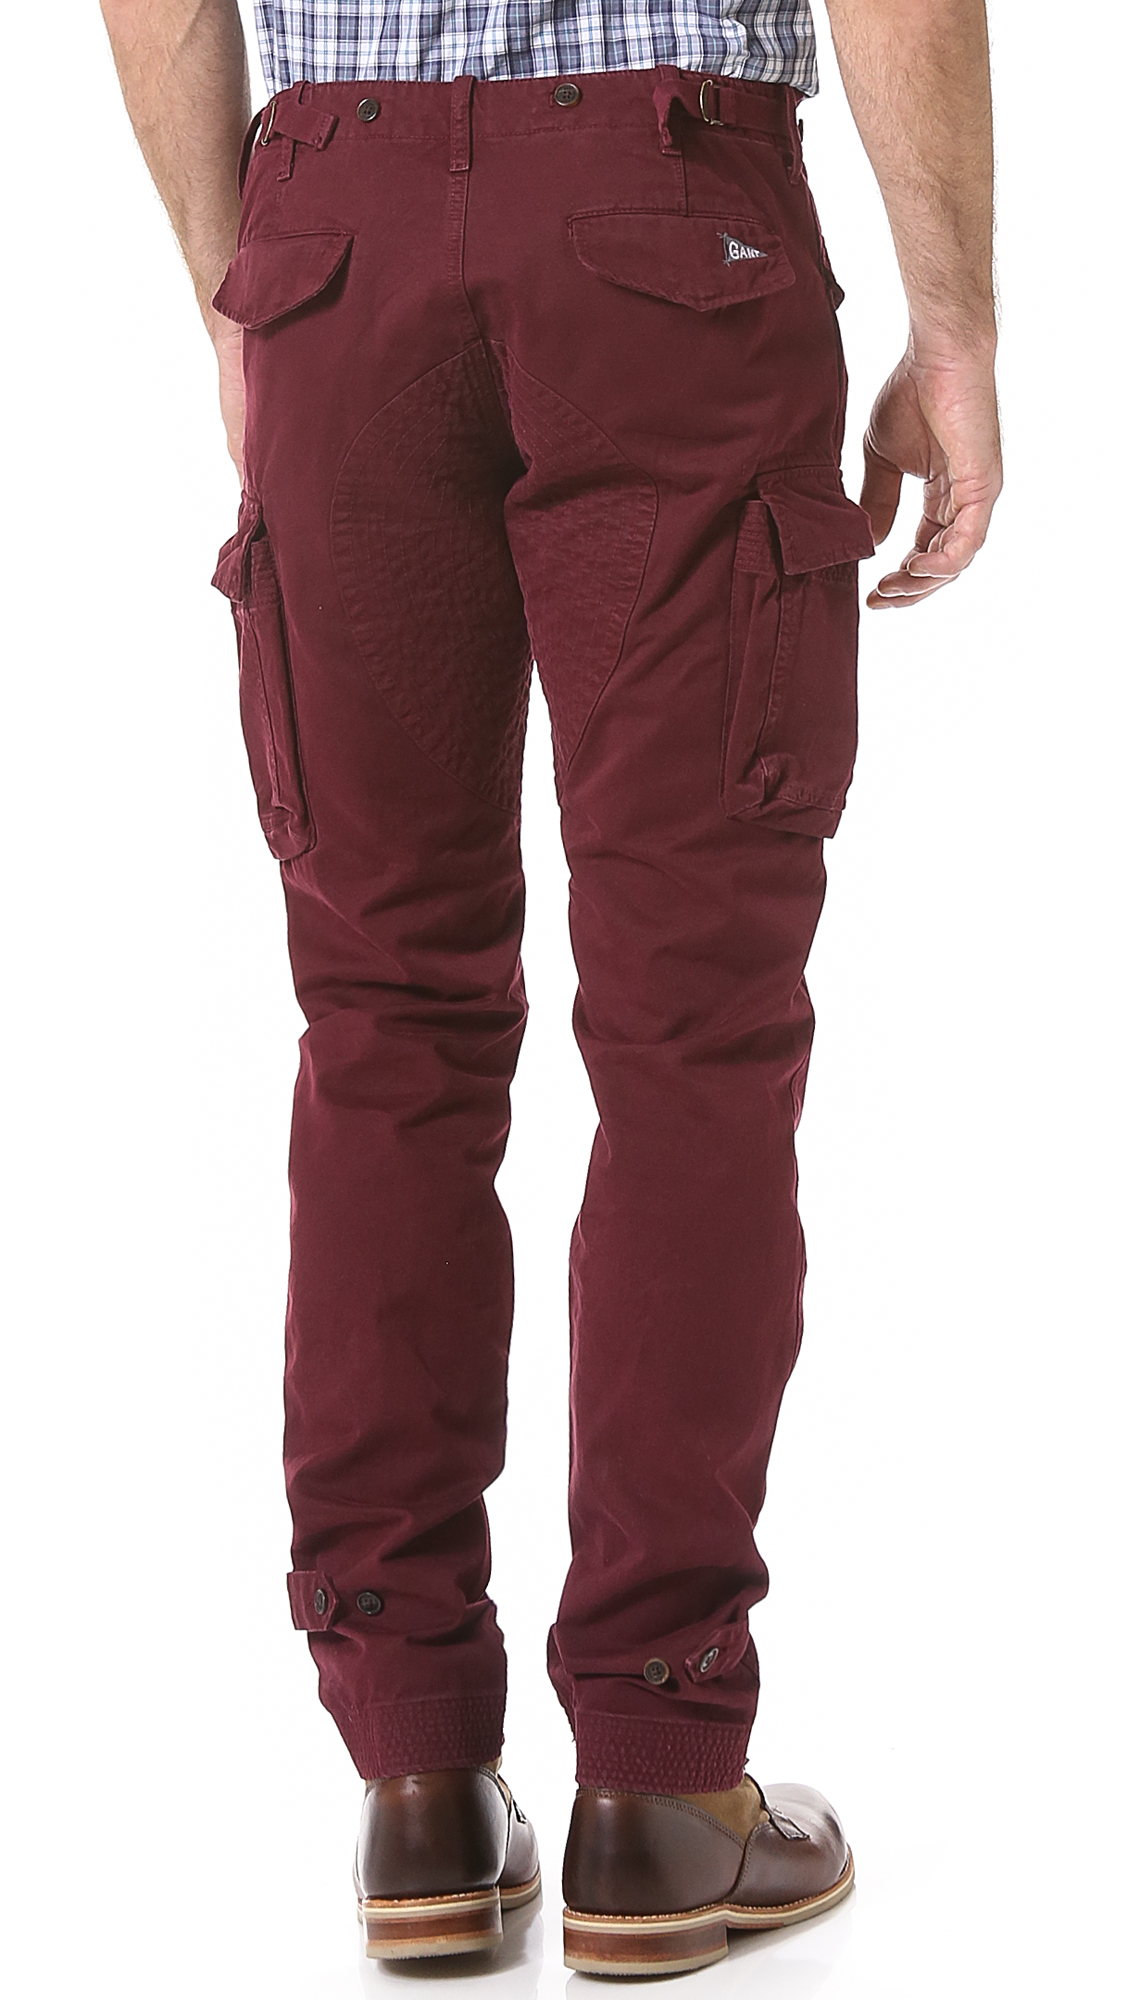 GANT The Mb Perfect Cargo Pants in Burgundy (Purple) for Men - Lyst